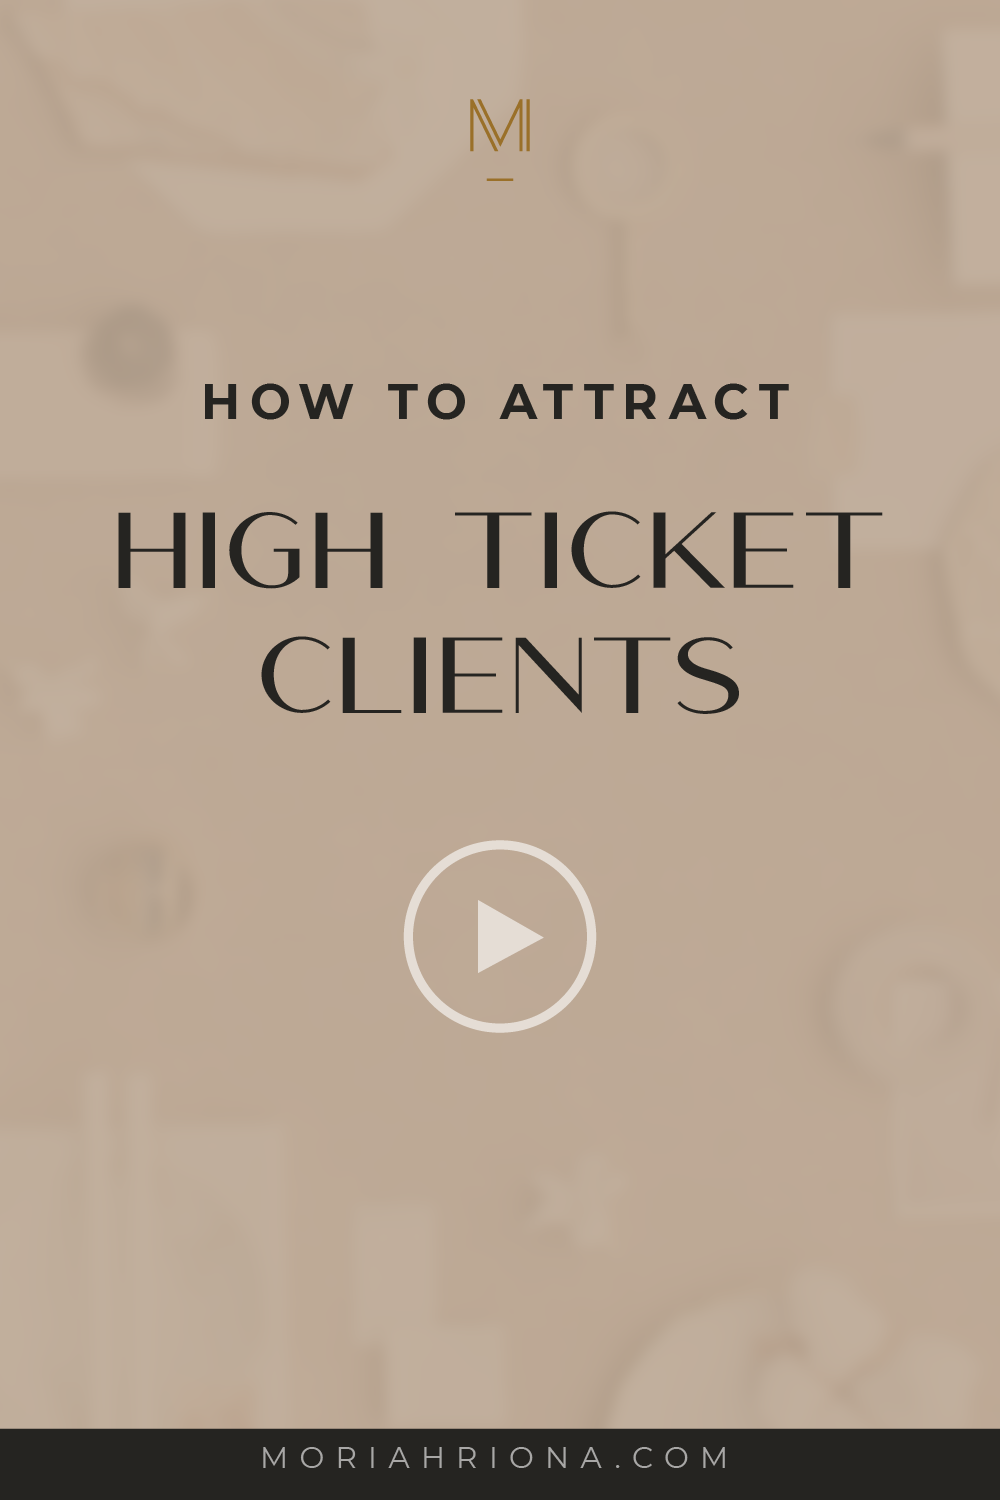 Wondering how to attract higher paying clients? This video is for you! I’m sharing my best tips for how to get high paying clients as a new entrepreneur, how to build a high ticket funnel, my high ticket secrets, lead generation and more! #highticket #coaching #onlinebusiness #entrepreneur